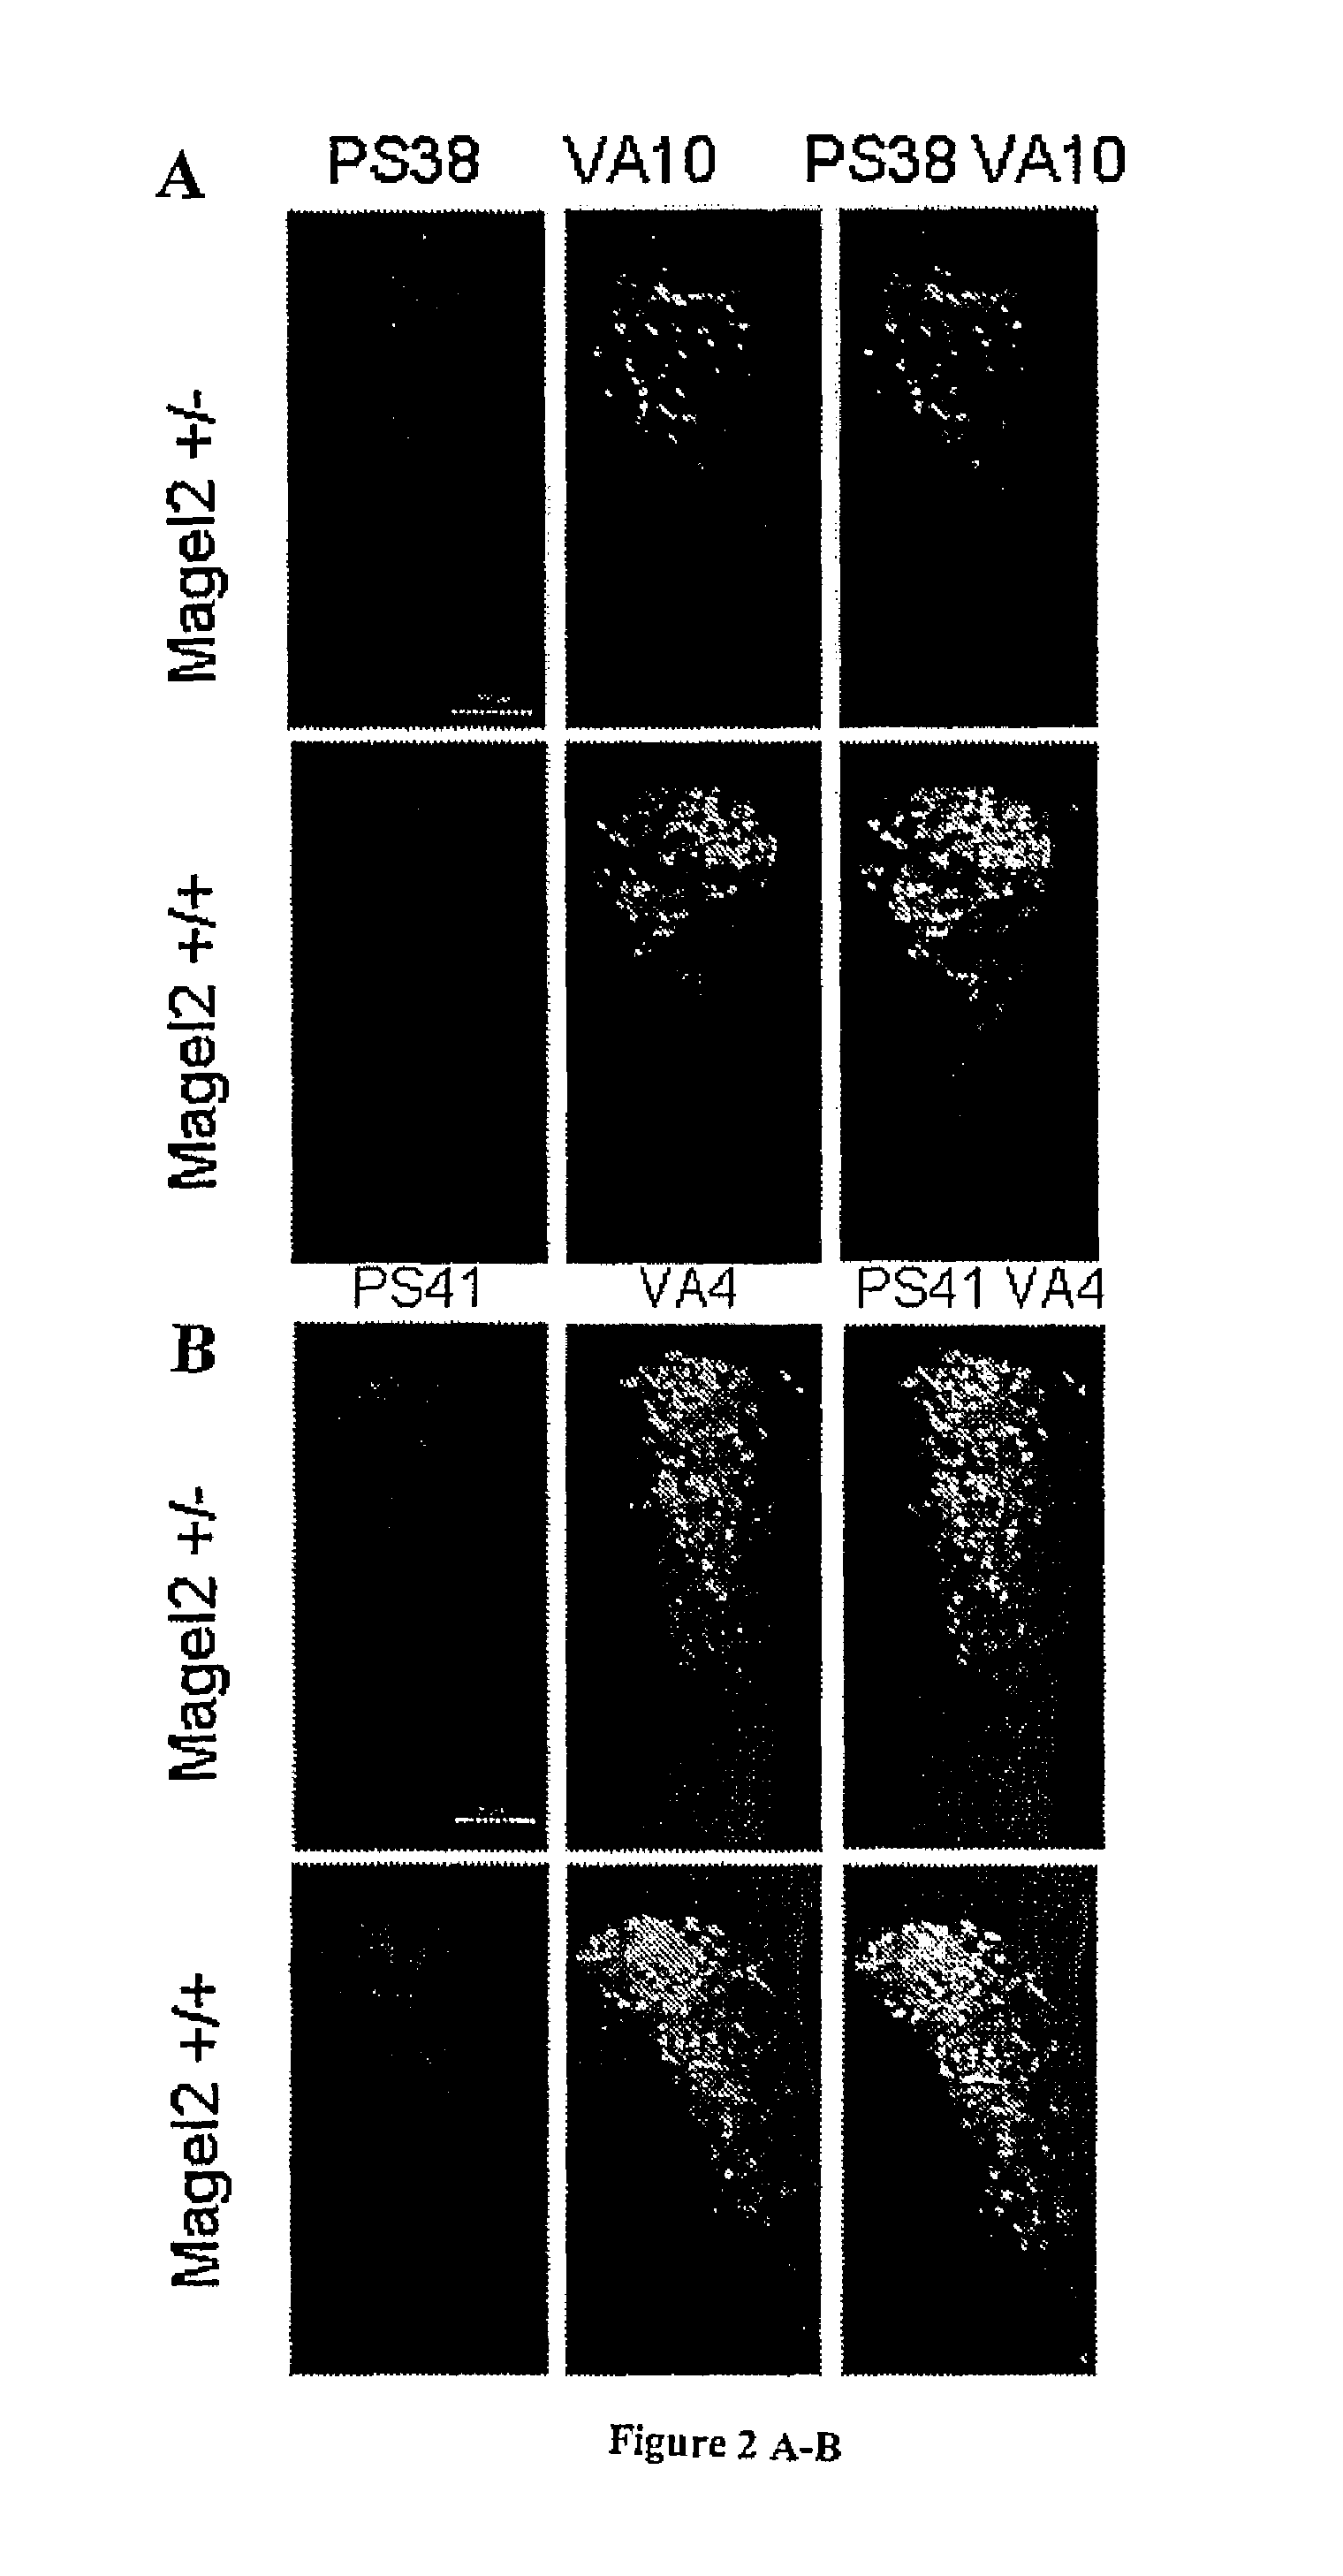 Methods for the treatment of a feeding disorder with onset during neonate development using an agonist of the oxytocin receptor